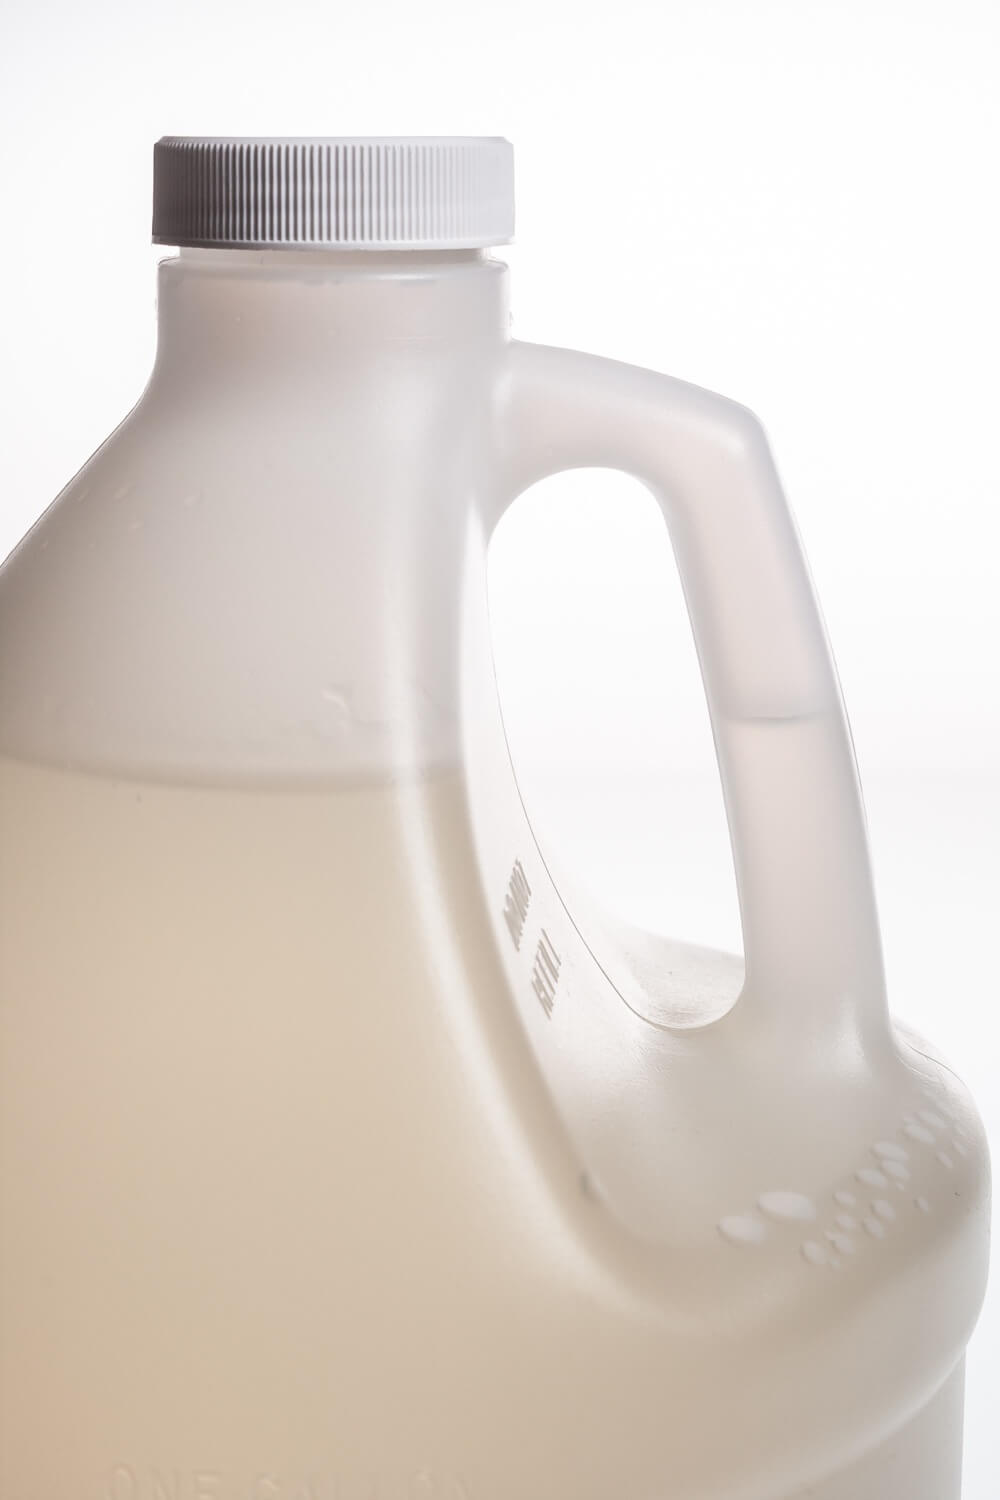 Buy J-Jelly Lubricant Gallon Jug At